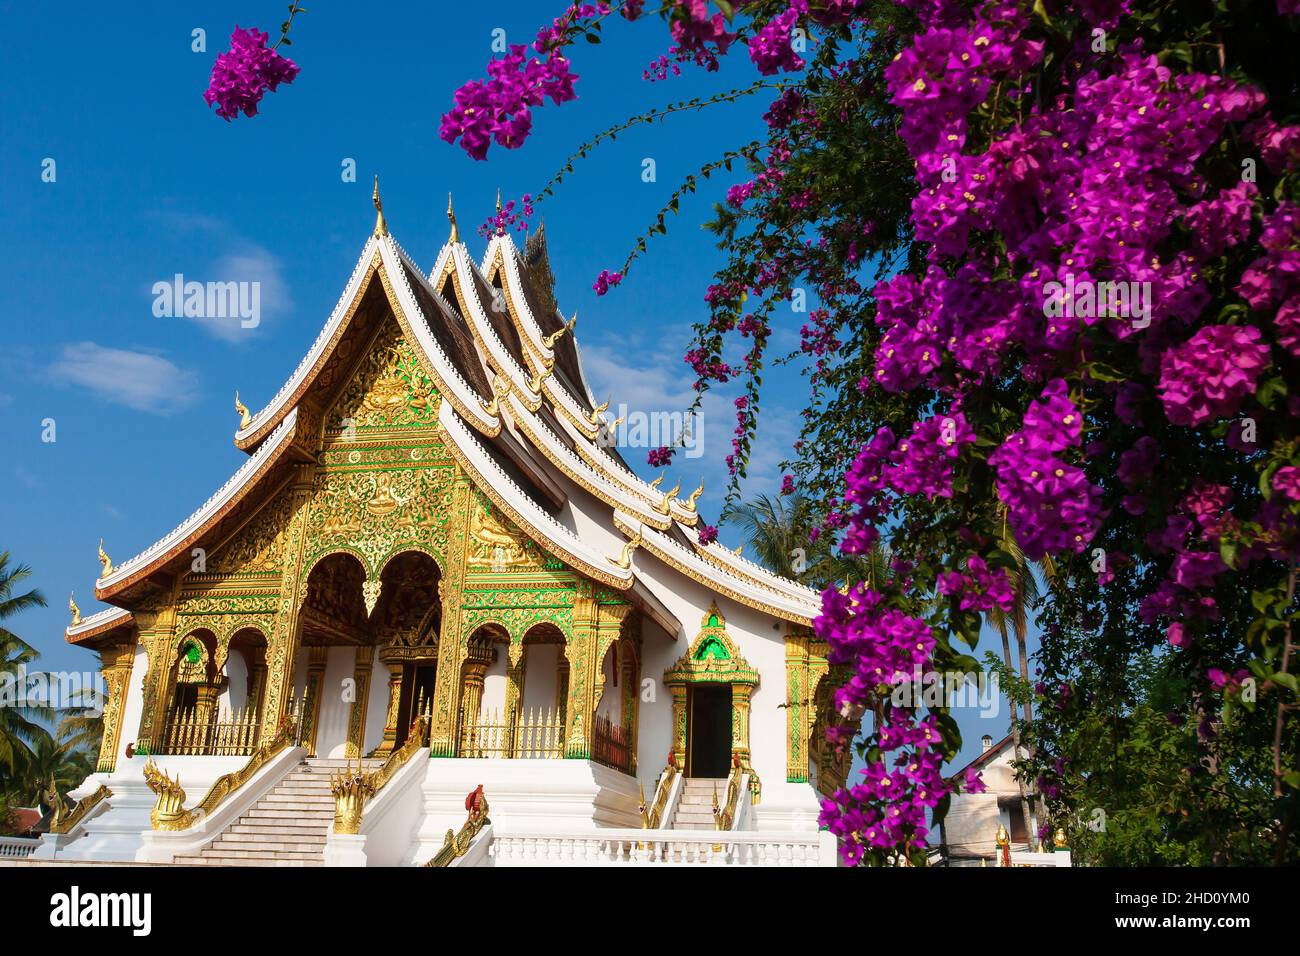 Picturesque exterior of the Royal Palace Museum of Luang Prabang, blooming Bougainvillea flowers in the foreground. Tourist attractions in Laos. Stock Photo